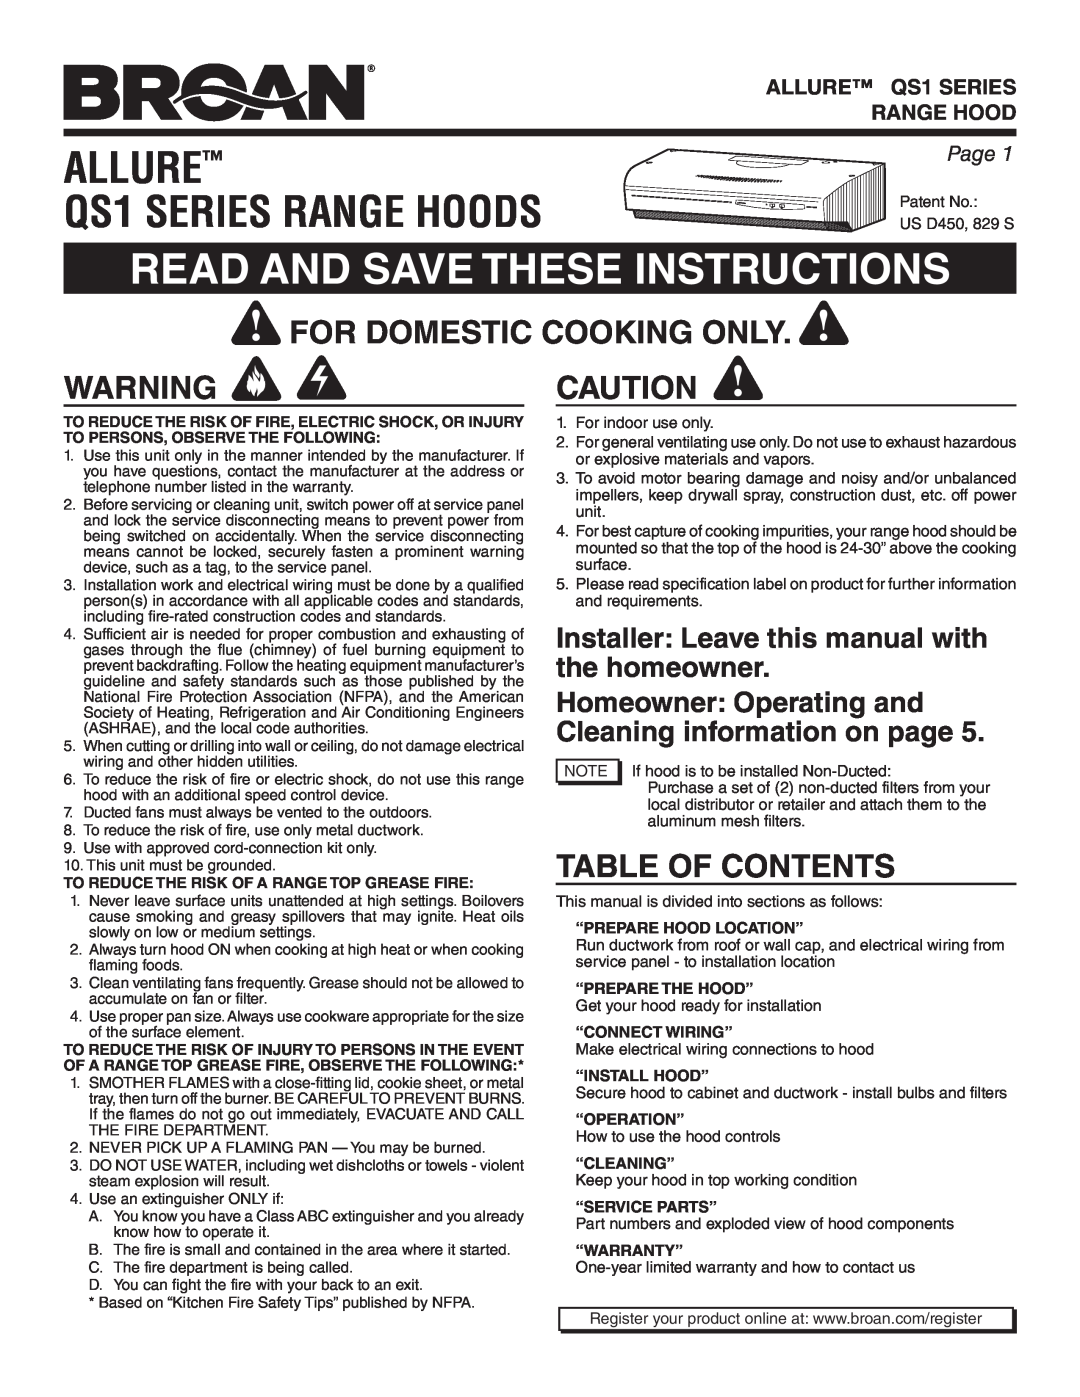 Broan QS136BL warranty Read And Save These Instructions, For Domestic Cooking Only, Table Of Contents, Page, “Operation” 